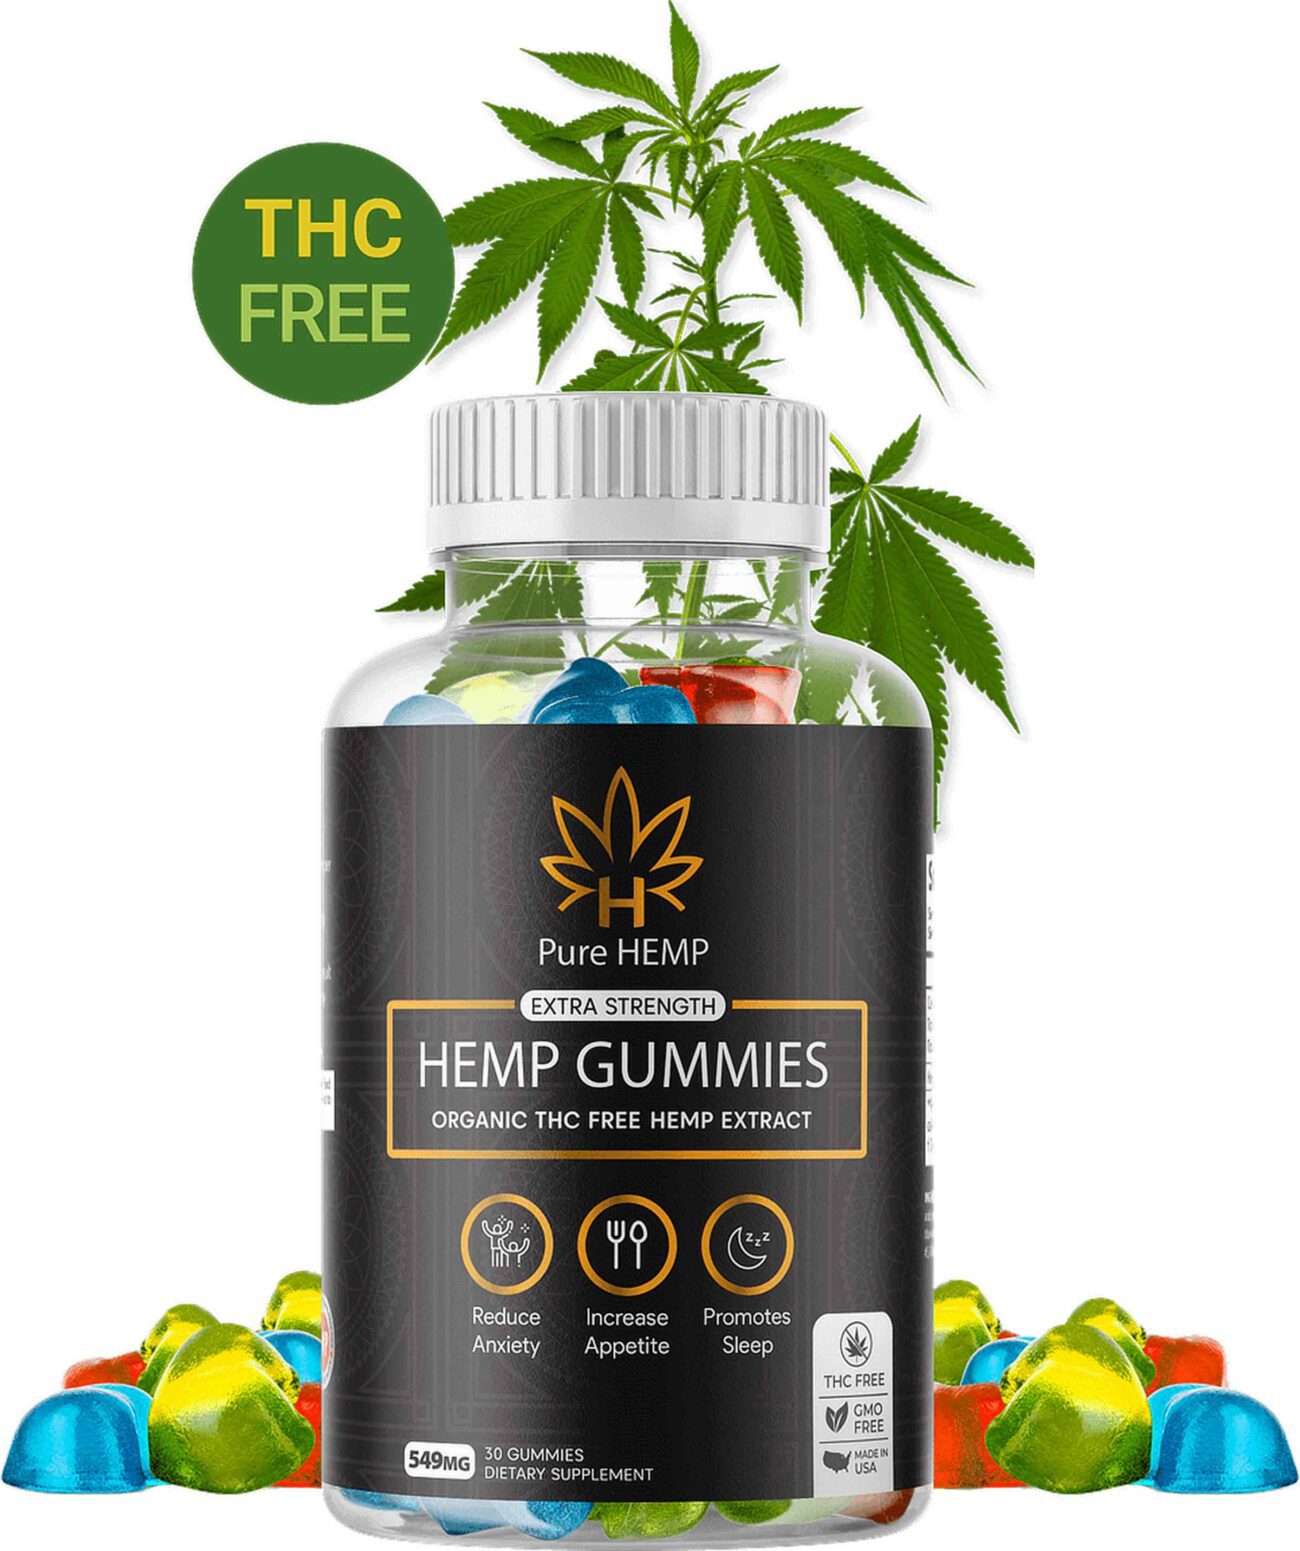 Hemp Gummies can help to support your well-being. Learn the facts and decide if these all natural treats are right for you!